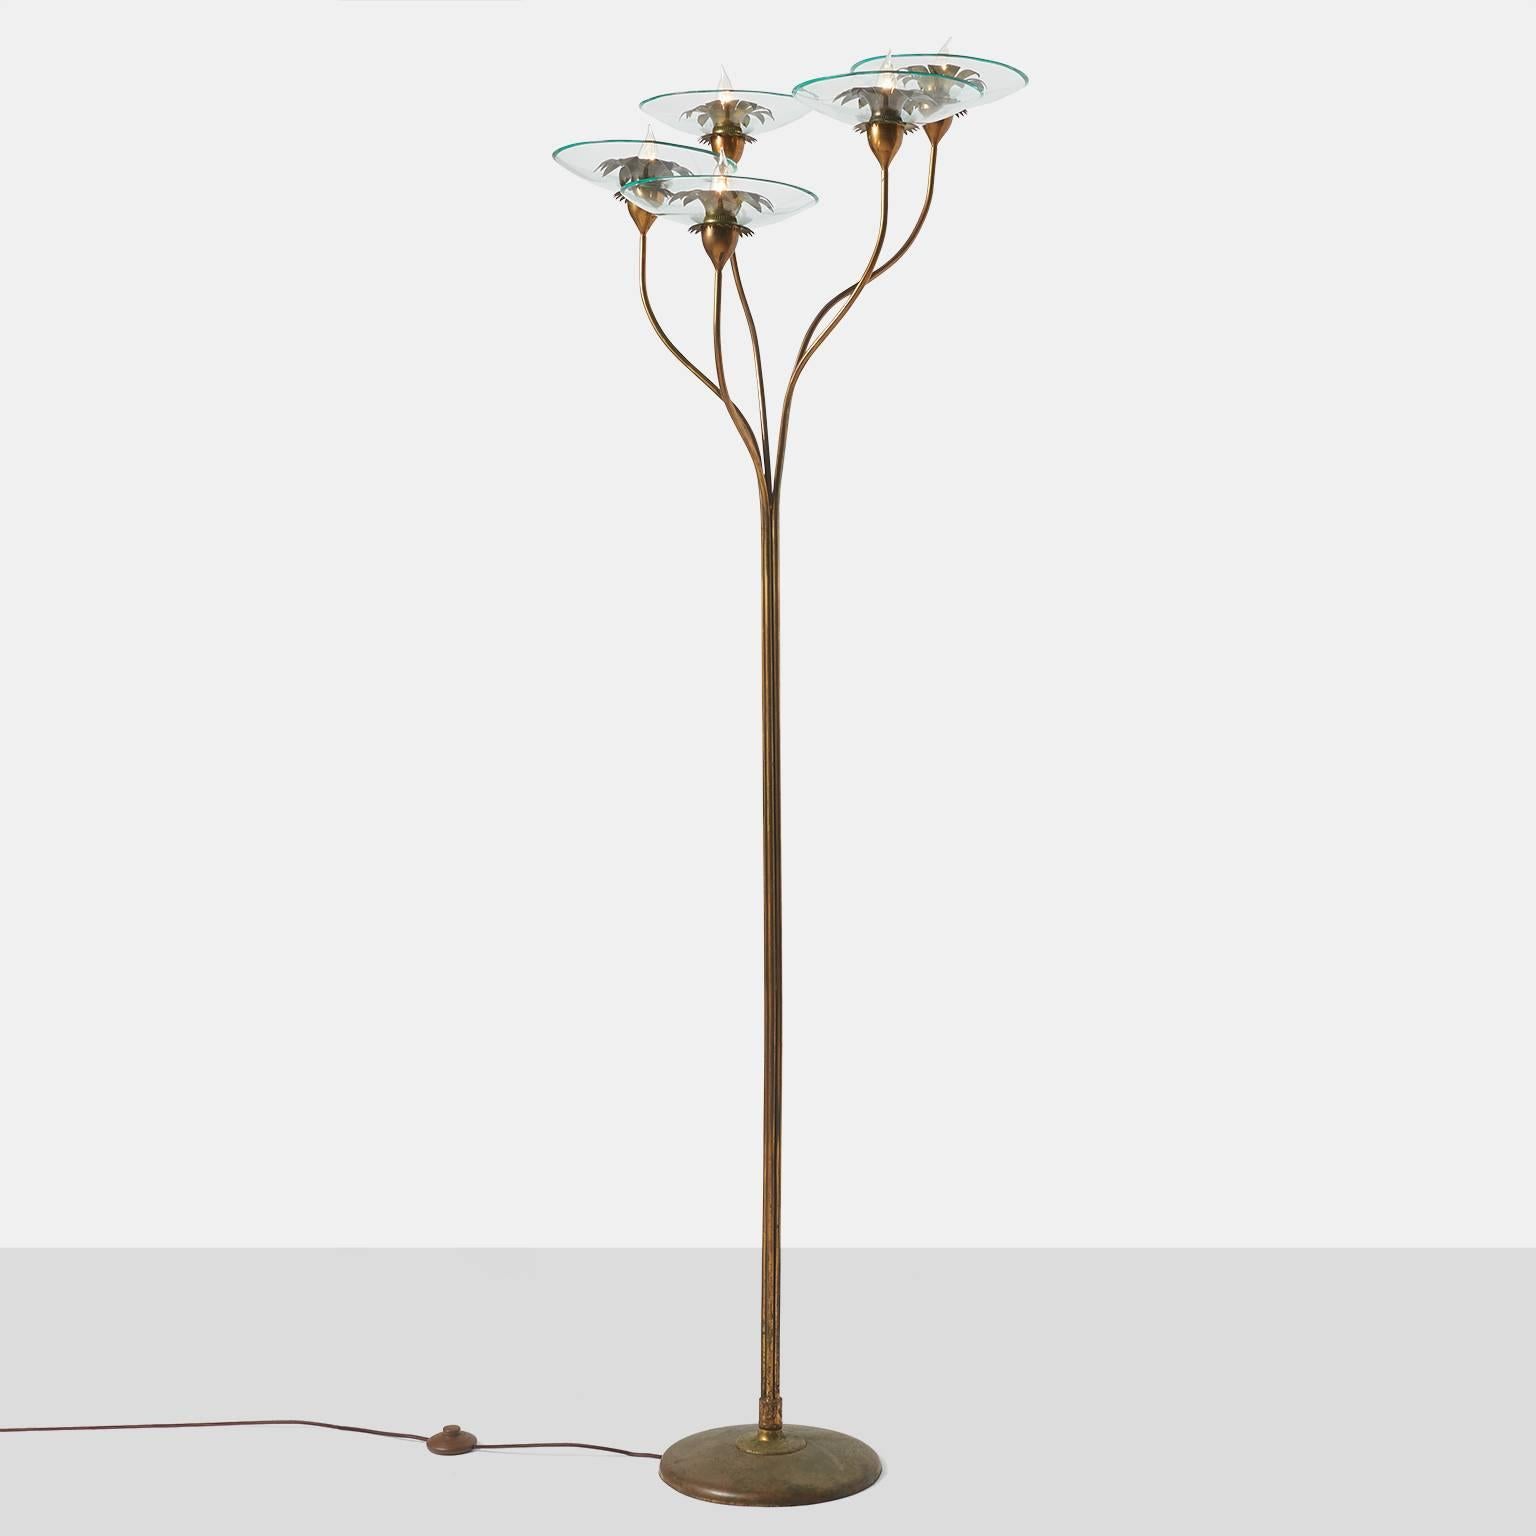 A very rare and documented five-light floor lamp with a floral branch detail in brass with glass bulbash and hand-cut brass leaf rosettes all in a rich natural aged brass patina.
Documented in the book 